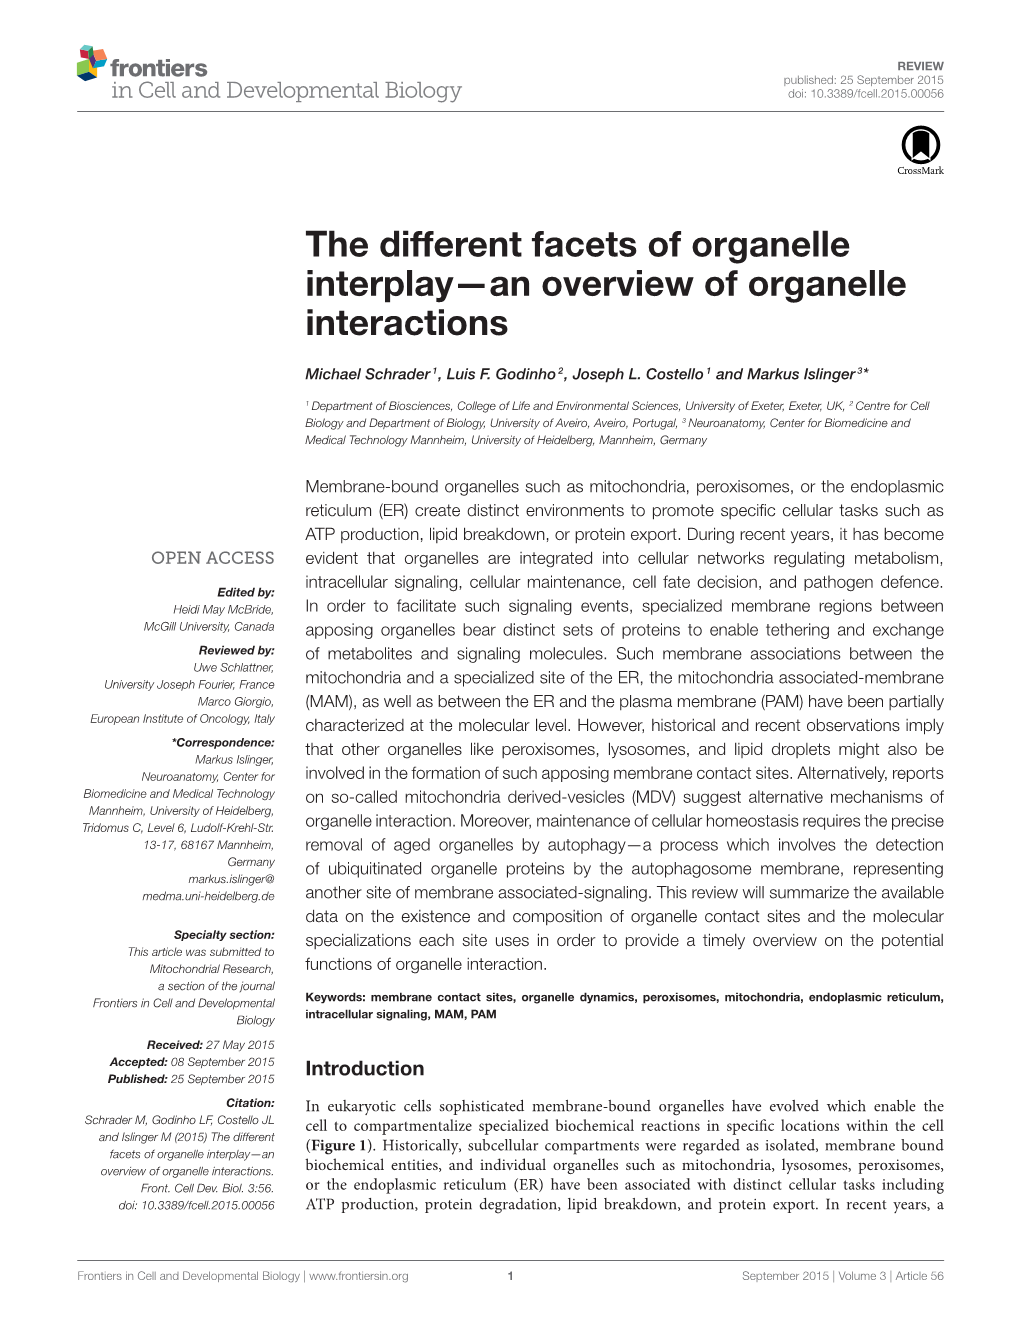 The Different Facets of Organelle Interplay—An Overview of Organelle Interactions